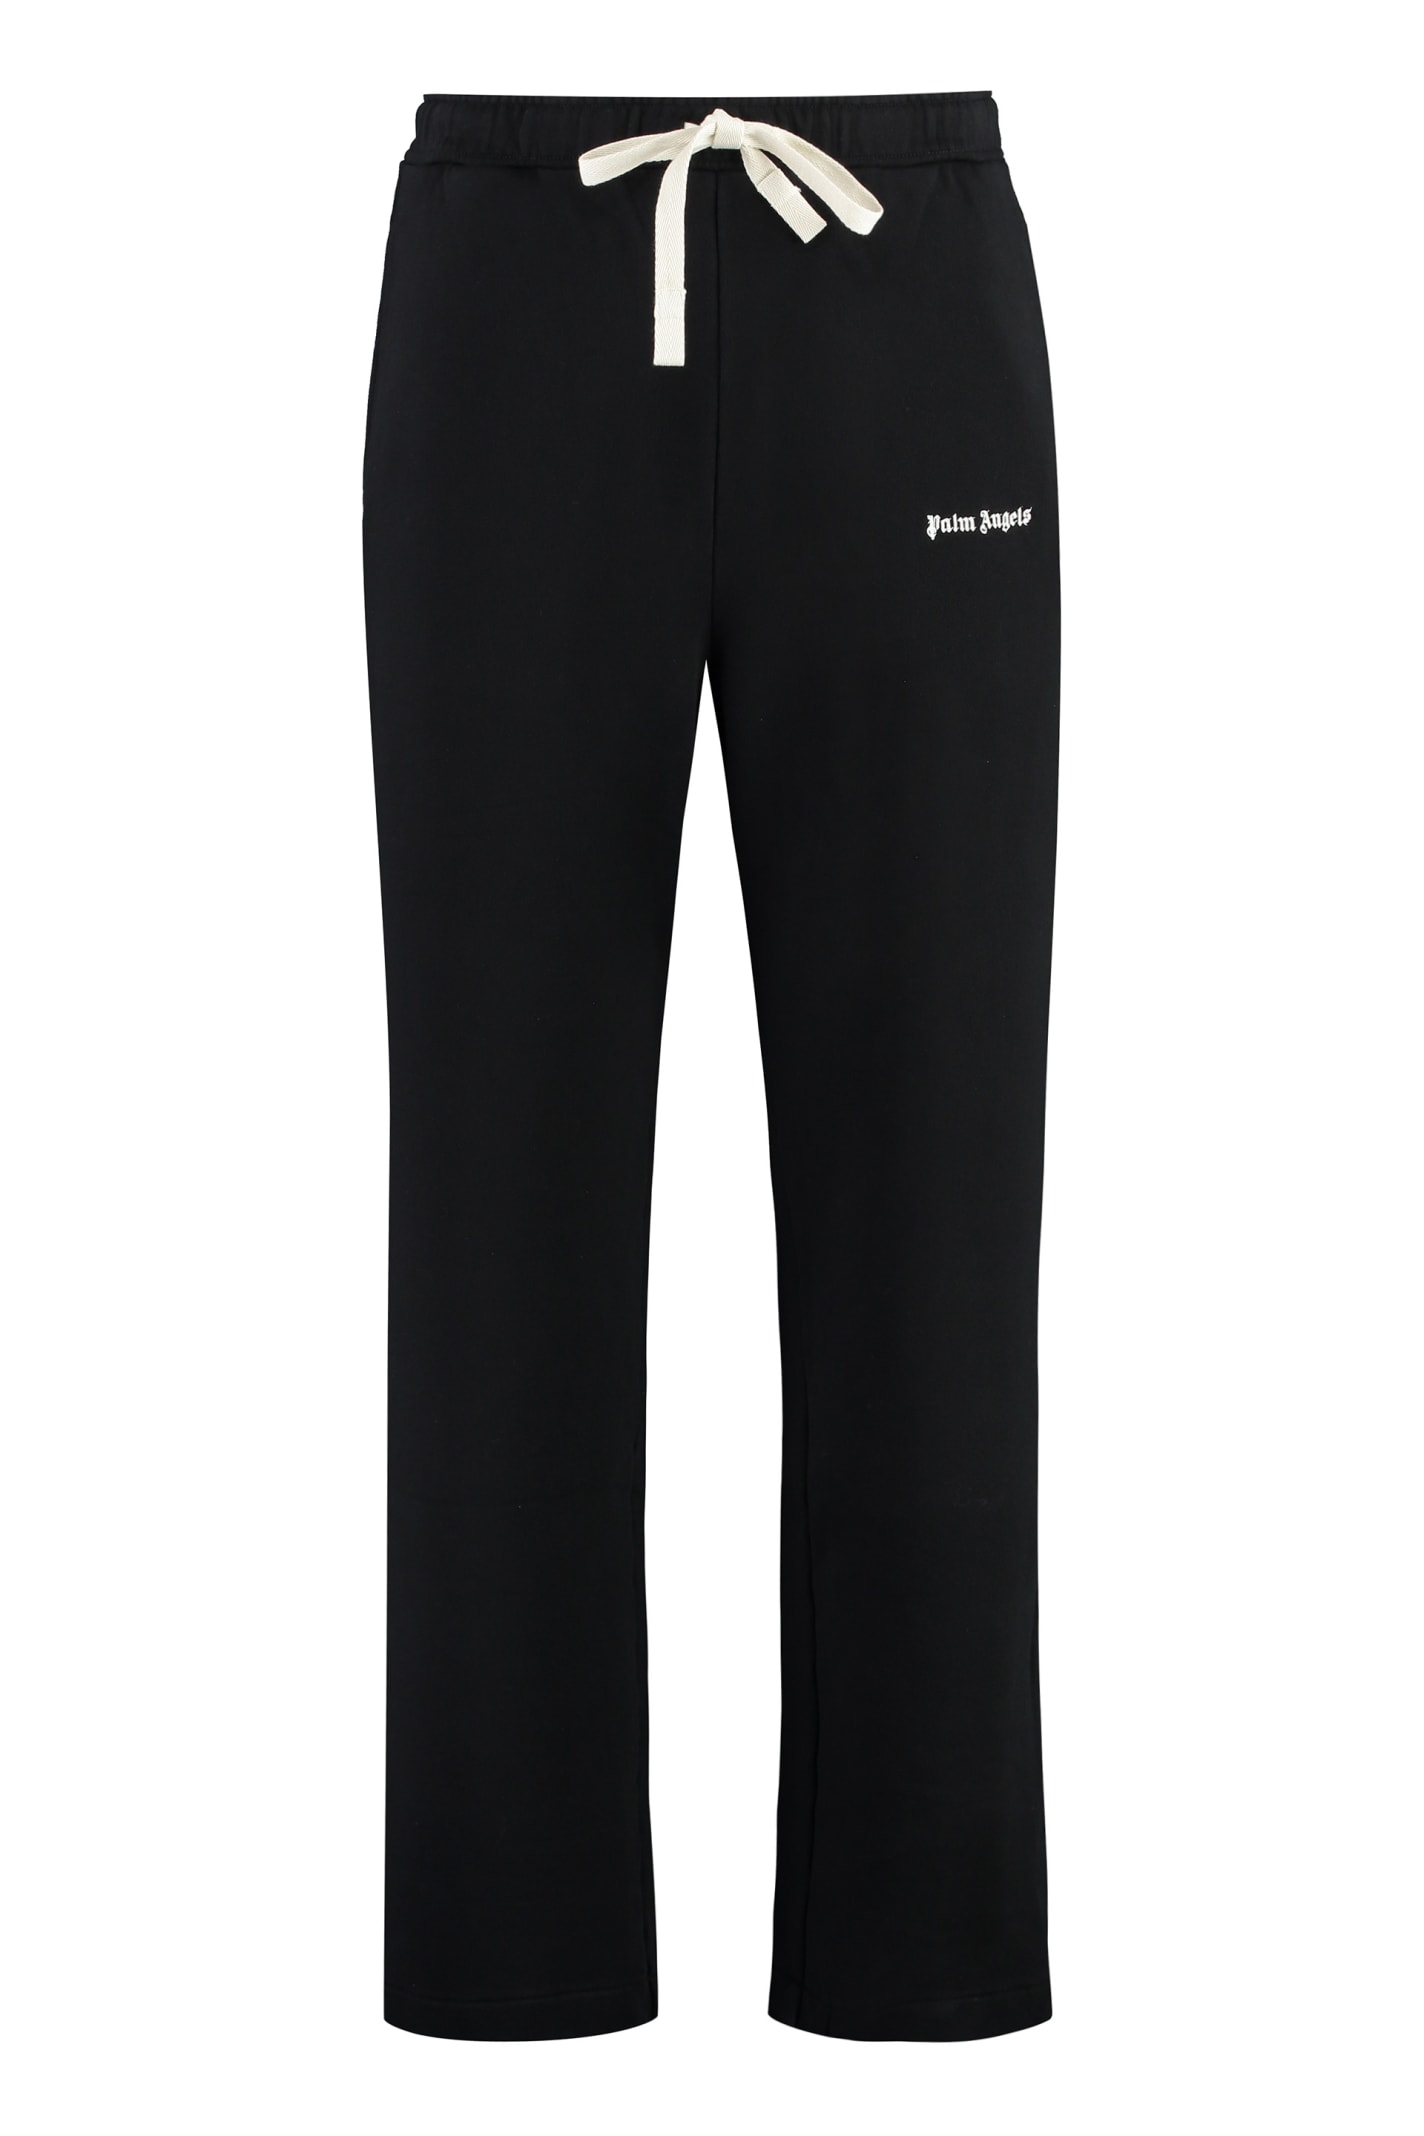 PALM ANGELS COTTON TROUSERS